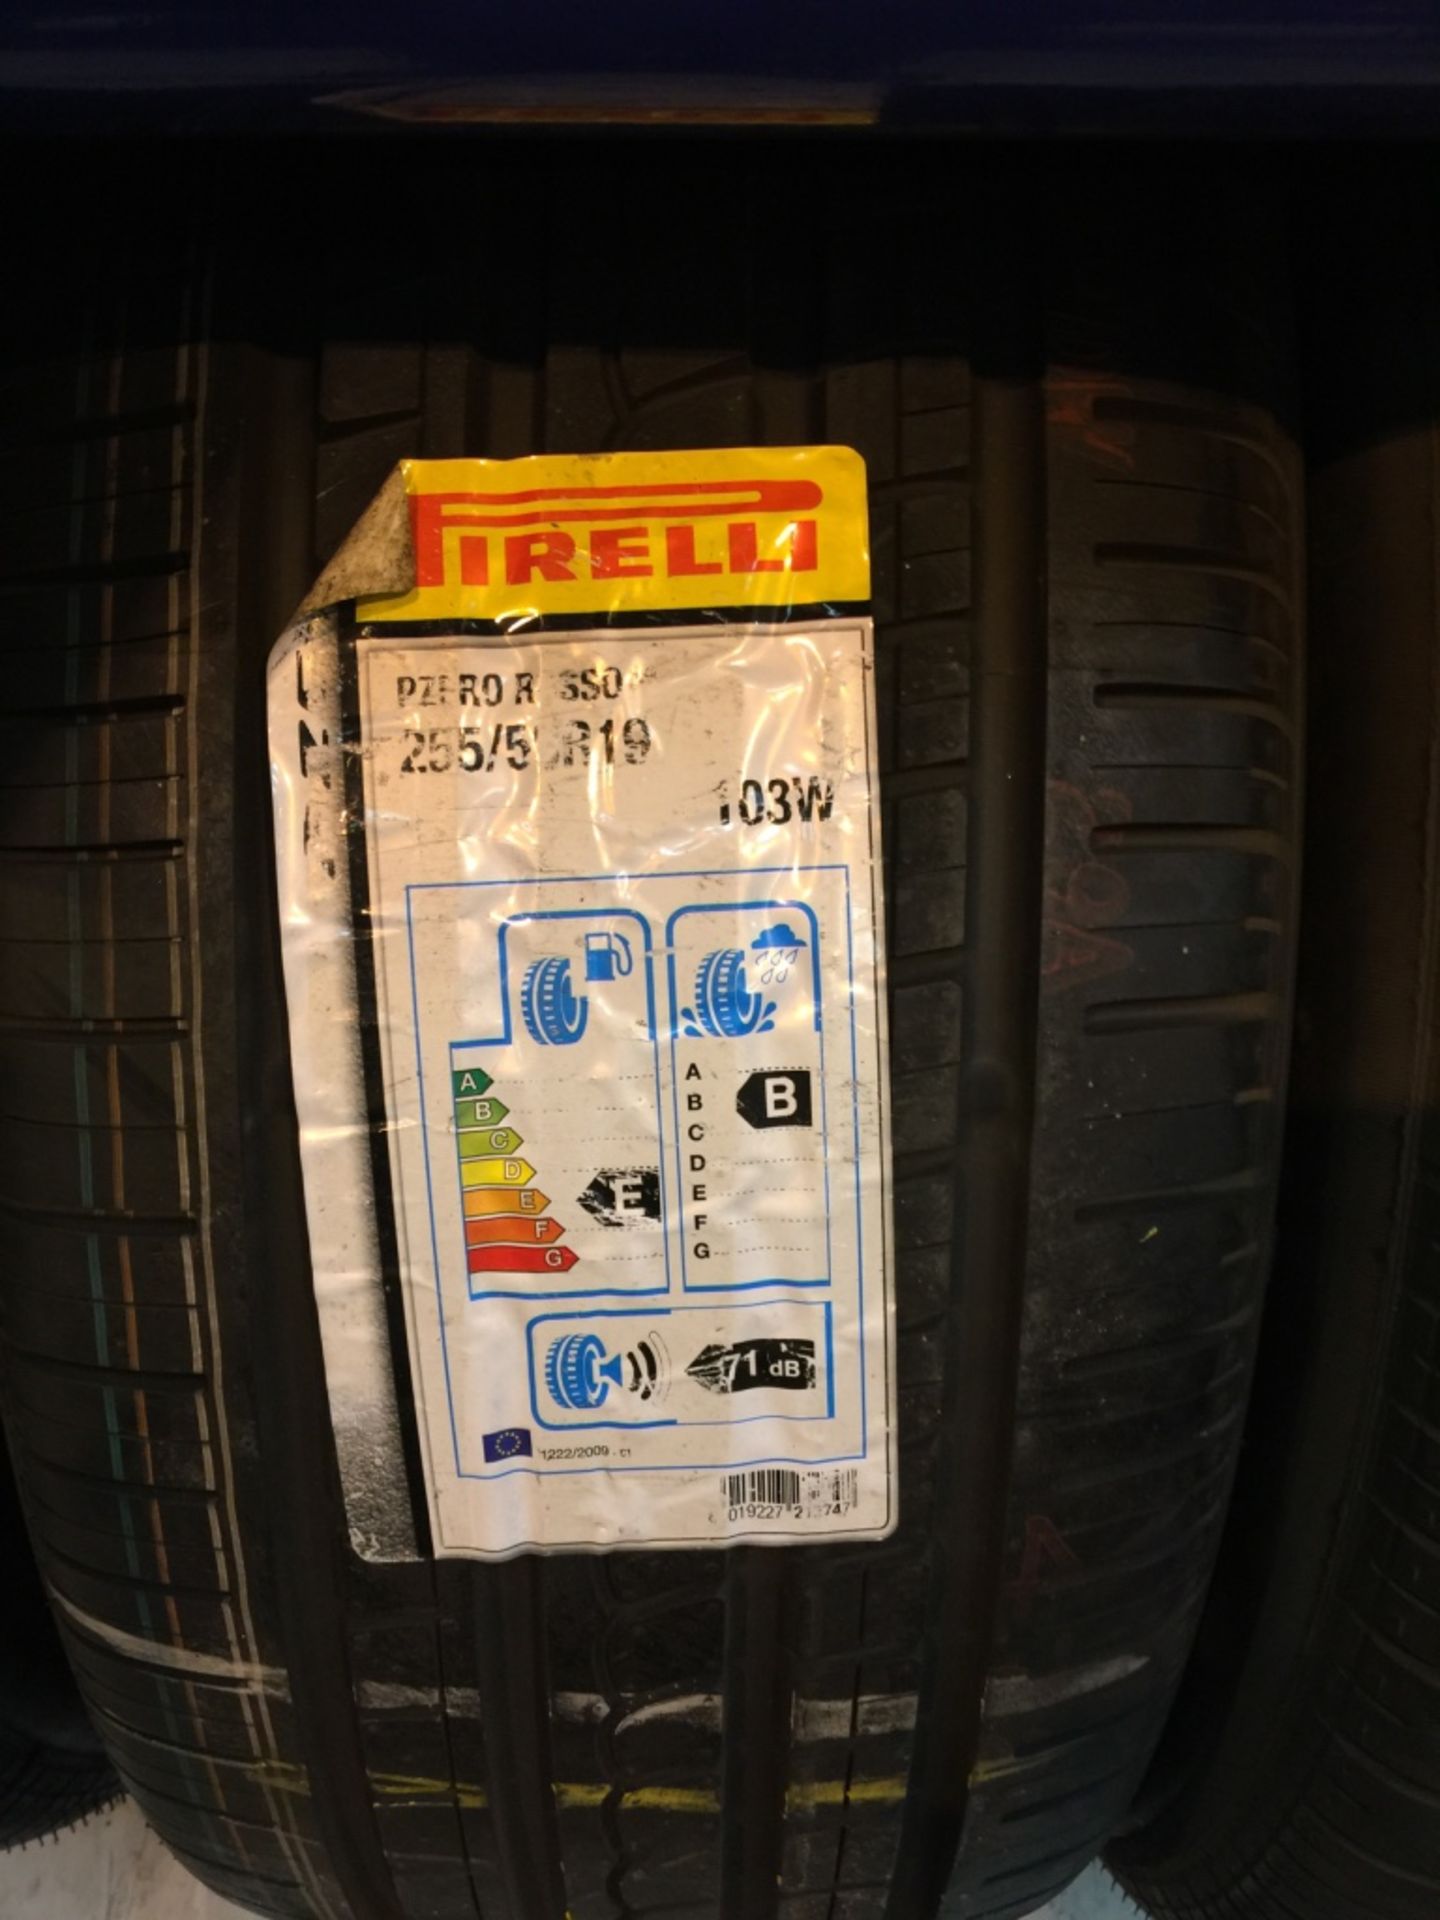 54: Pirelli Tyres Car & 4X4 - Many Large Sizes to include 18,19,21" Please see further Pictures ( - Image 42 of 55